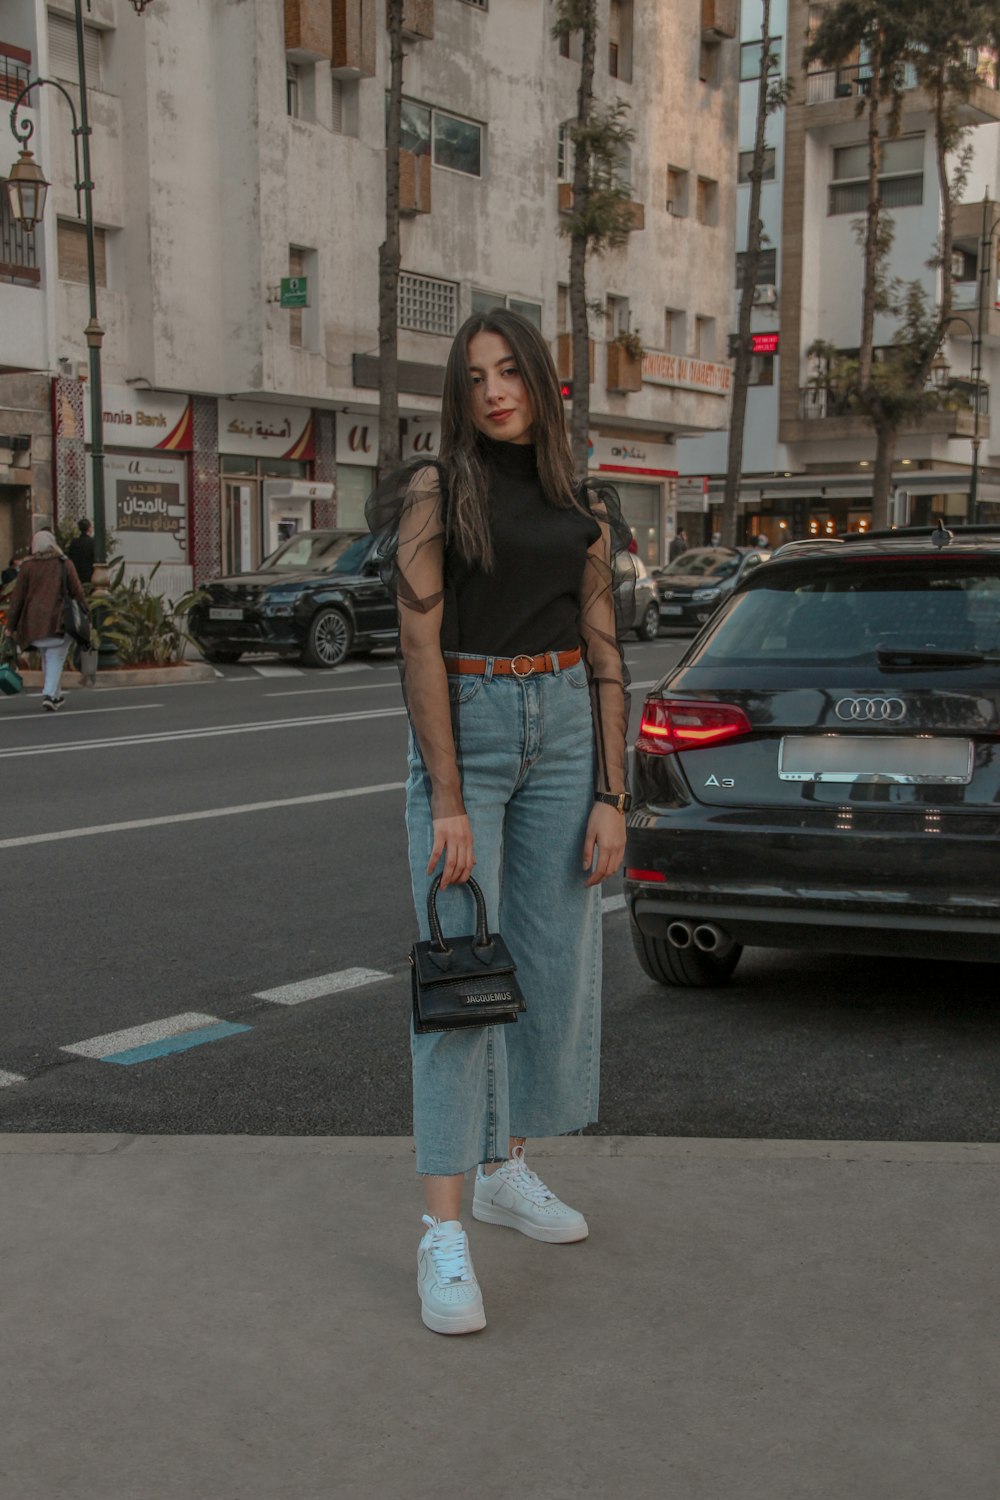 woman in black shirt and blue denim jeans standing on sidewalk during daytime